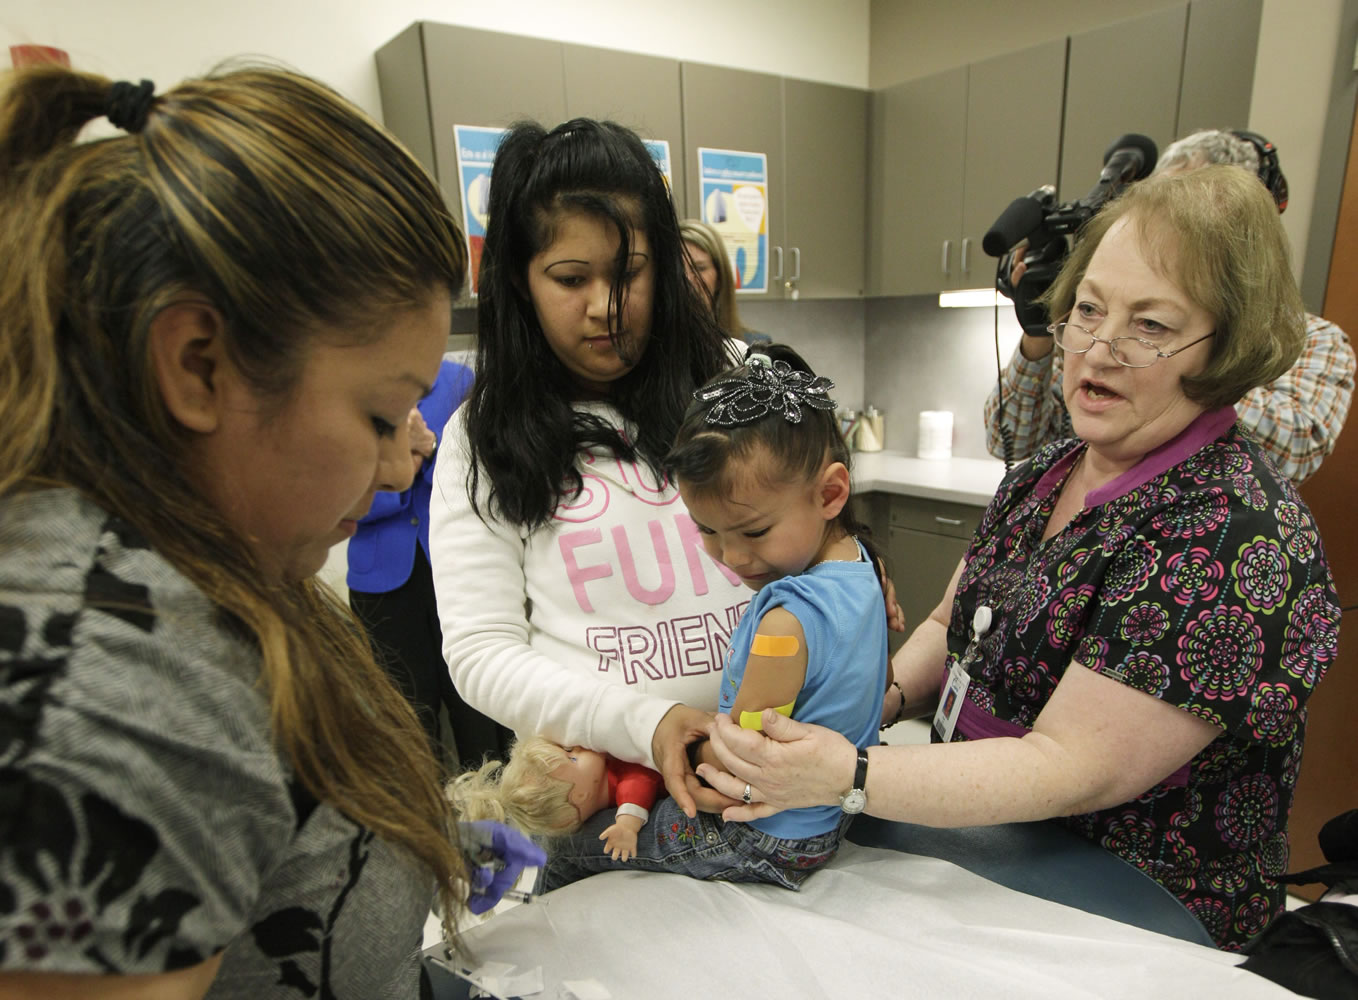 Nurses Fatima Guillen, left, and Fran Wendt, right, give Kimberly Magdeleno, 4, a Tdap whooping cough booster shot as she is held by her mother, Claudia Solorio, on May 3 at a health clinic in Tacoma.